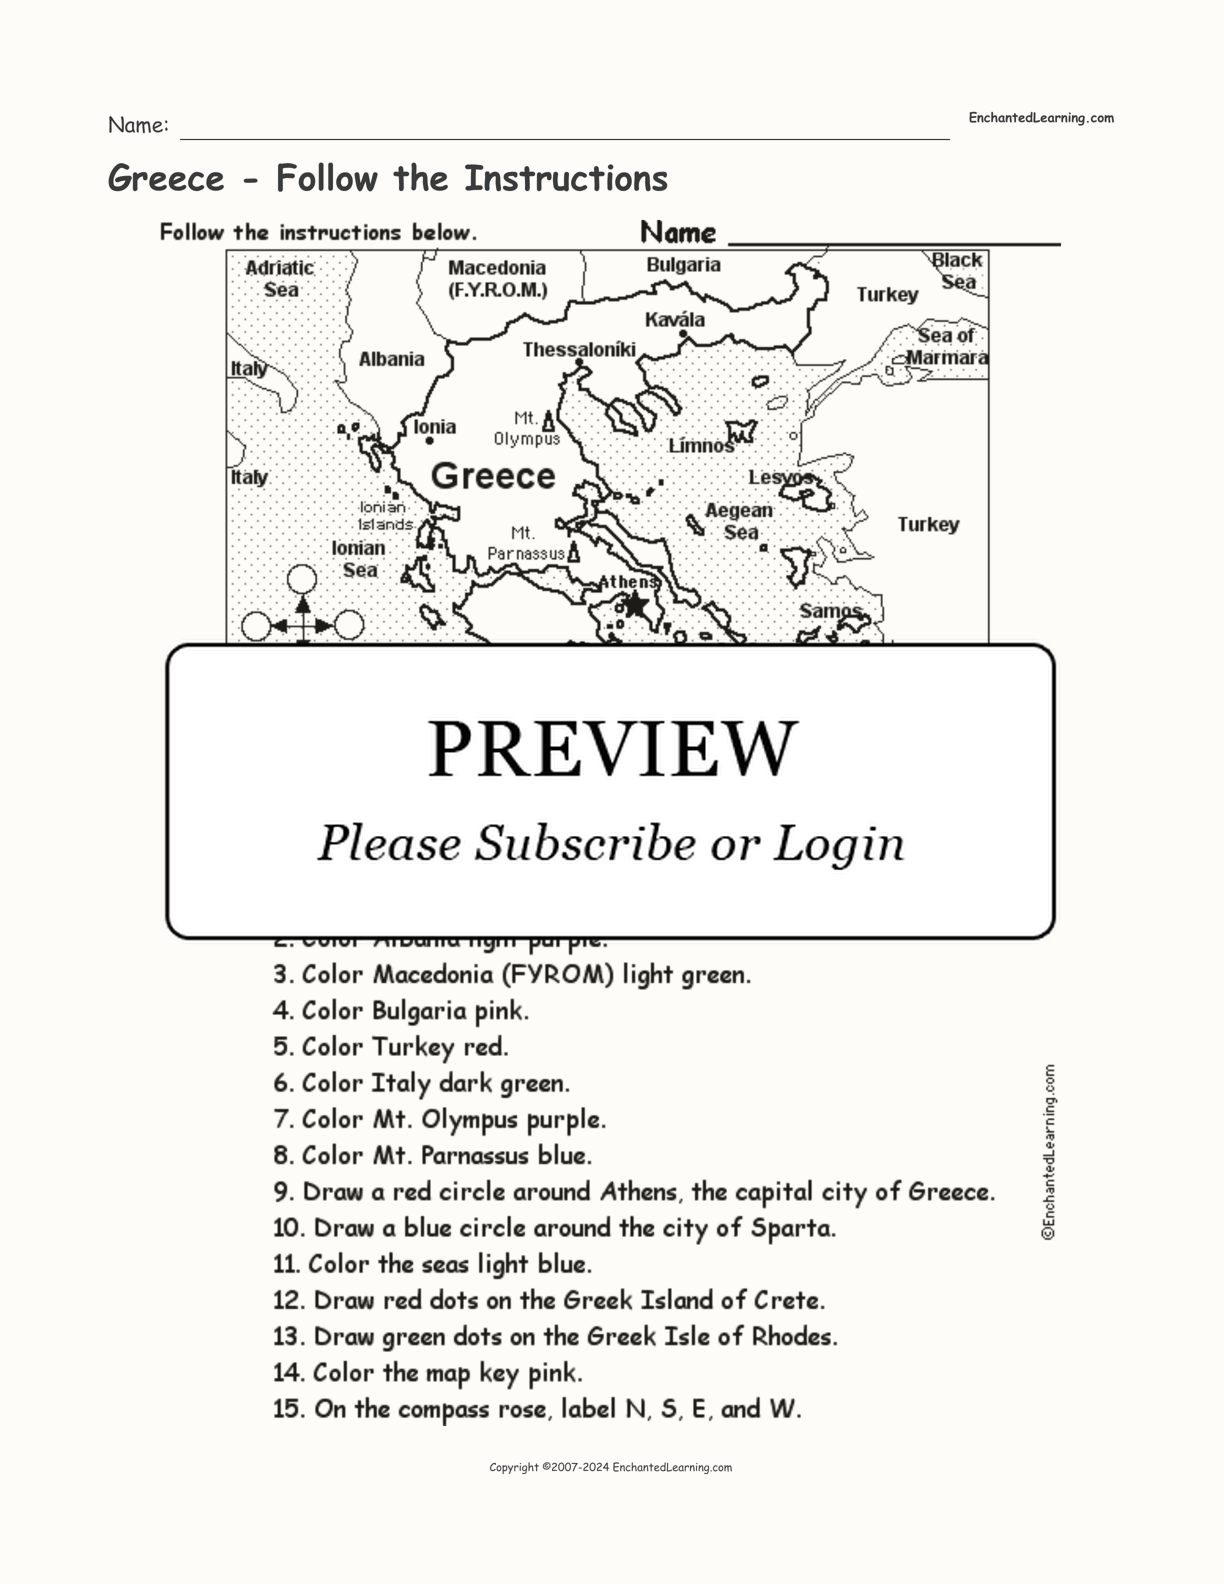 Greece - Follow the Instructions interactive worksheet page 1